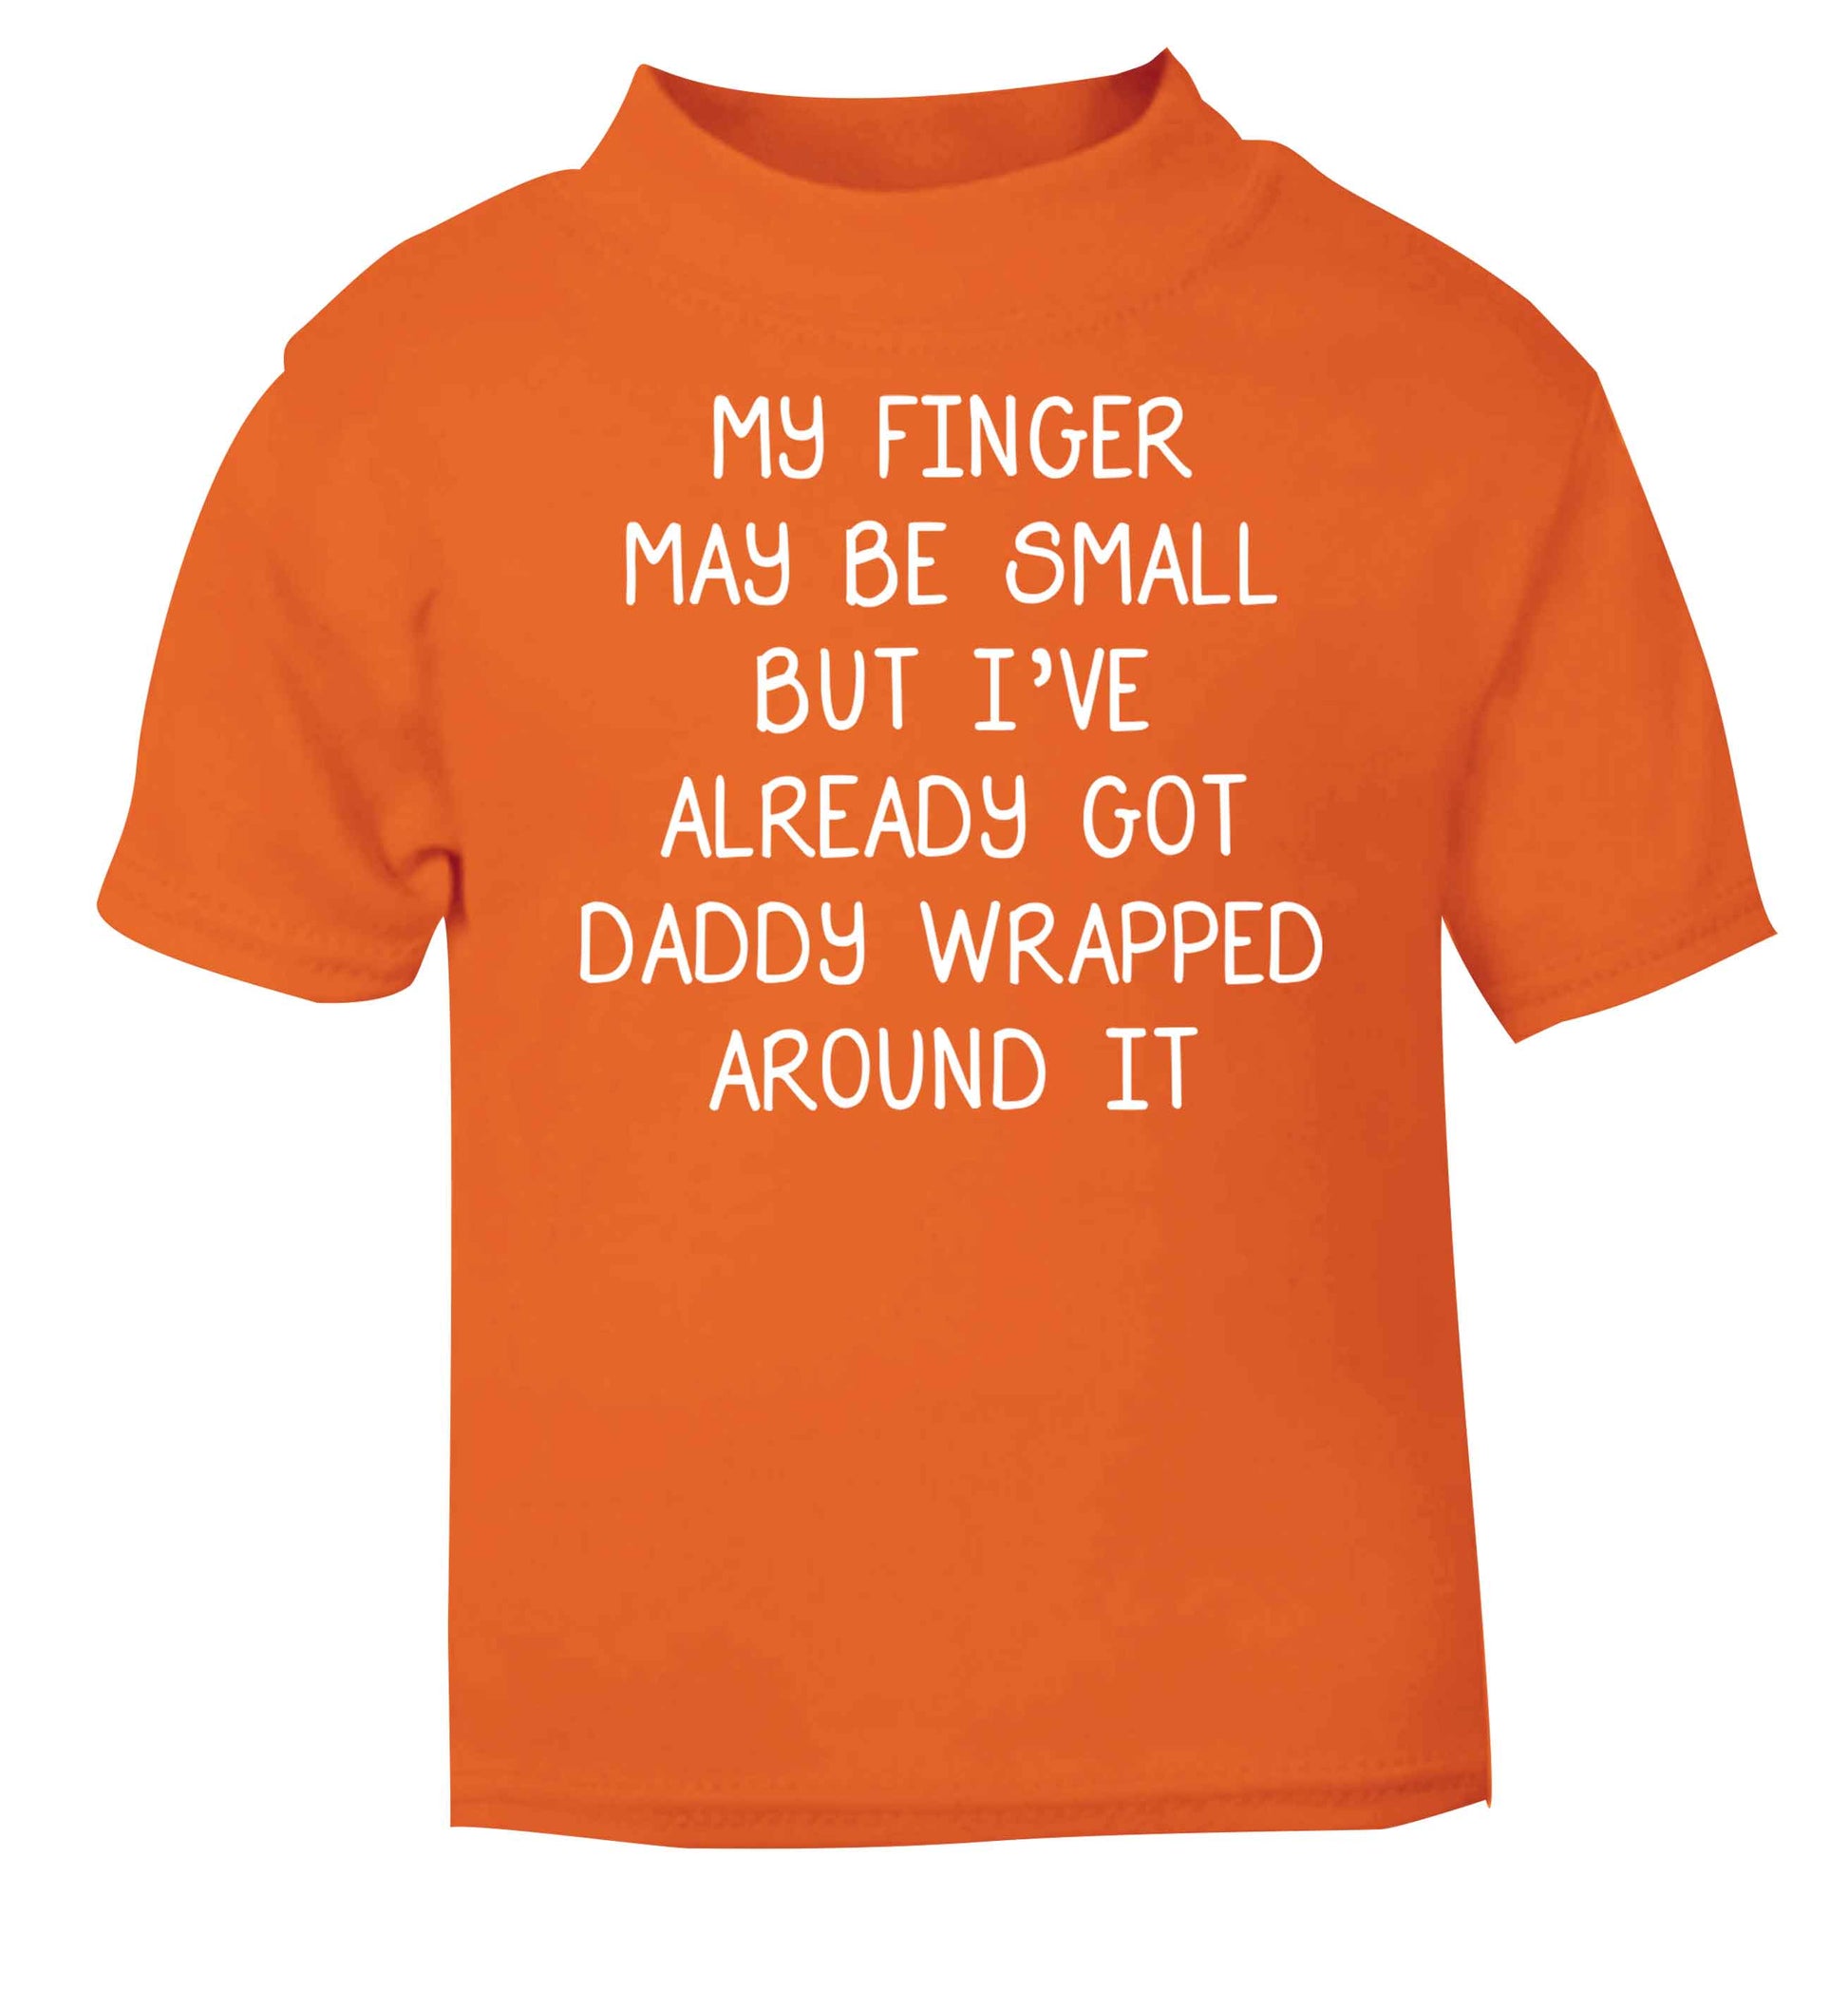 My finger may be small but I've already got daddy wrapped around it orange baby toddler Tshirt 2 Years